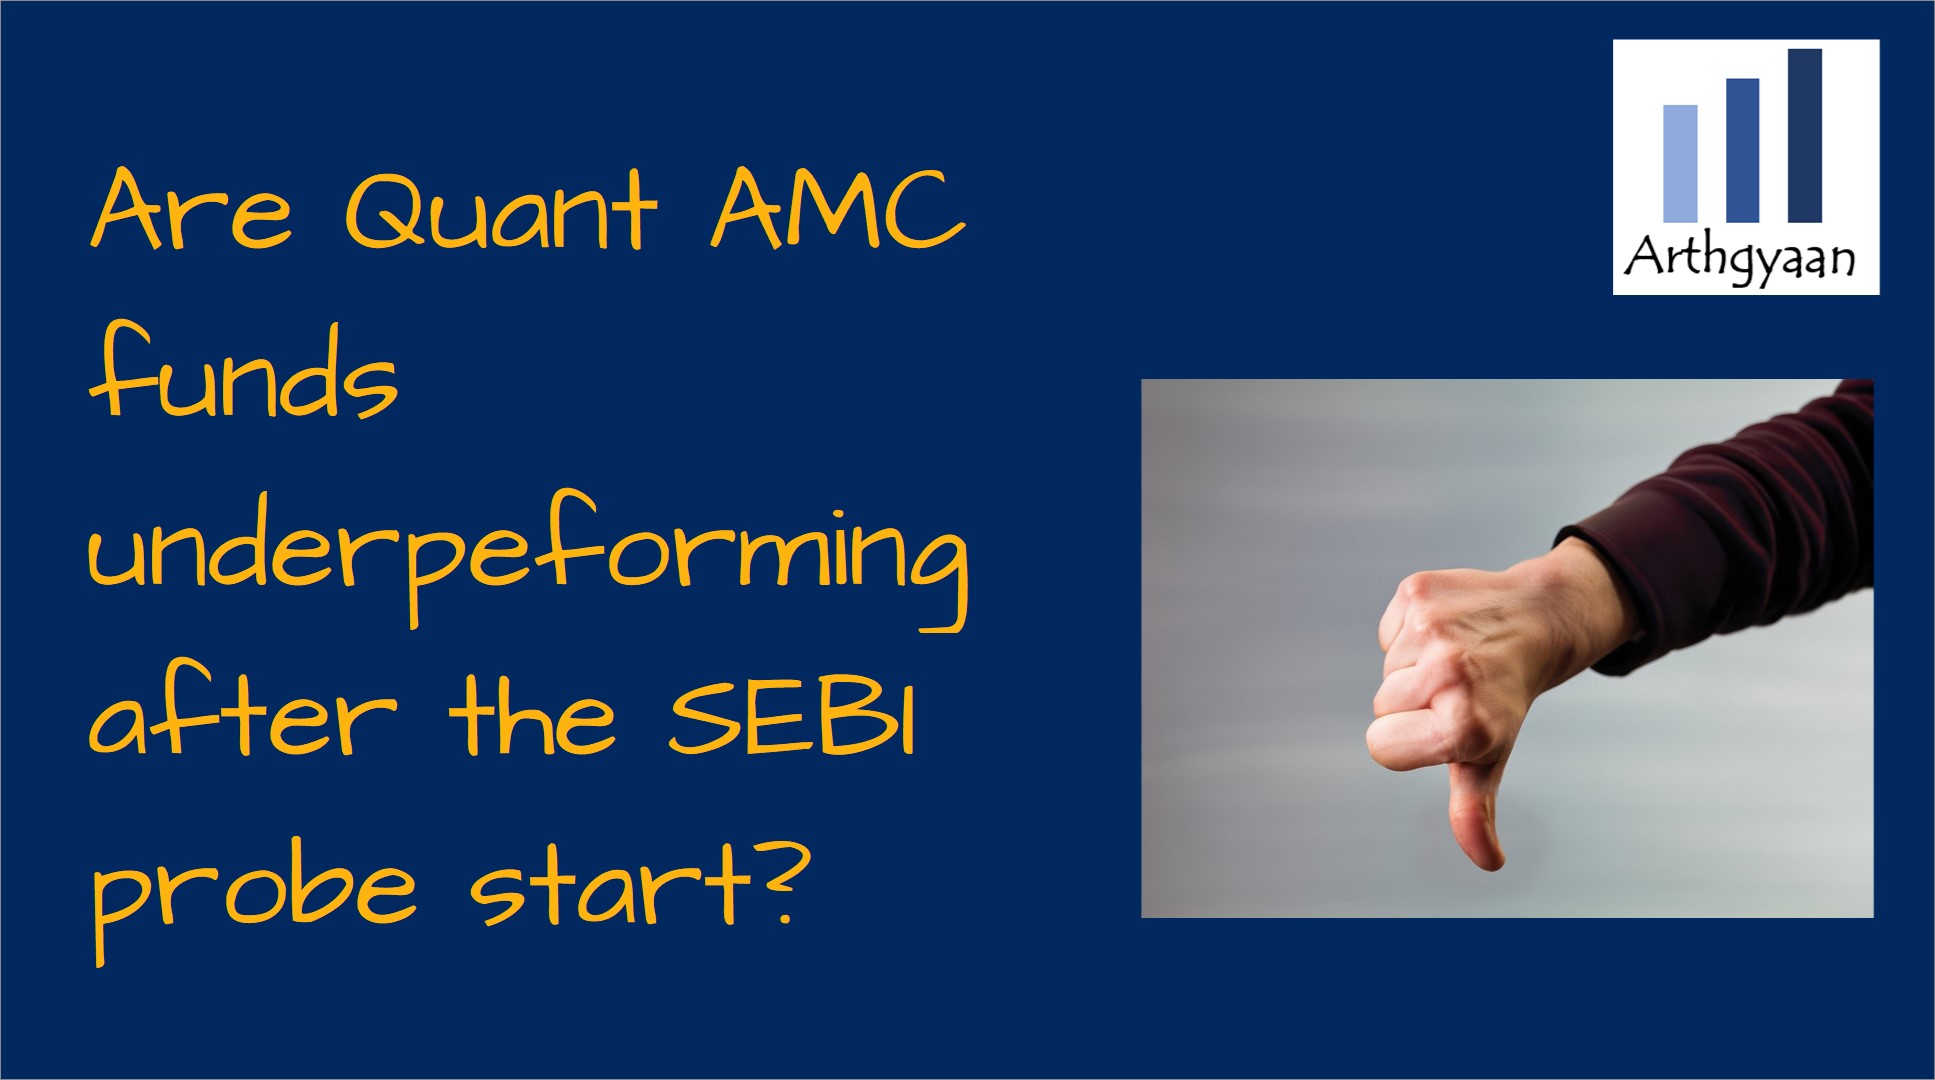 Are Quant AMC funds underpeforming after the SEBI probe start?